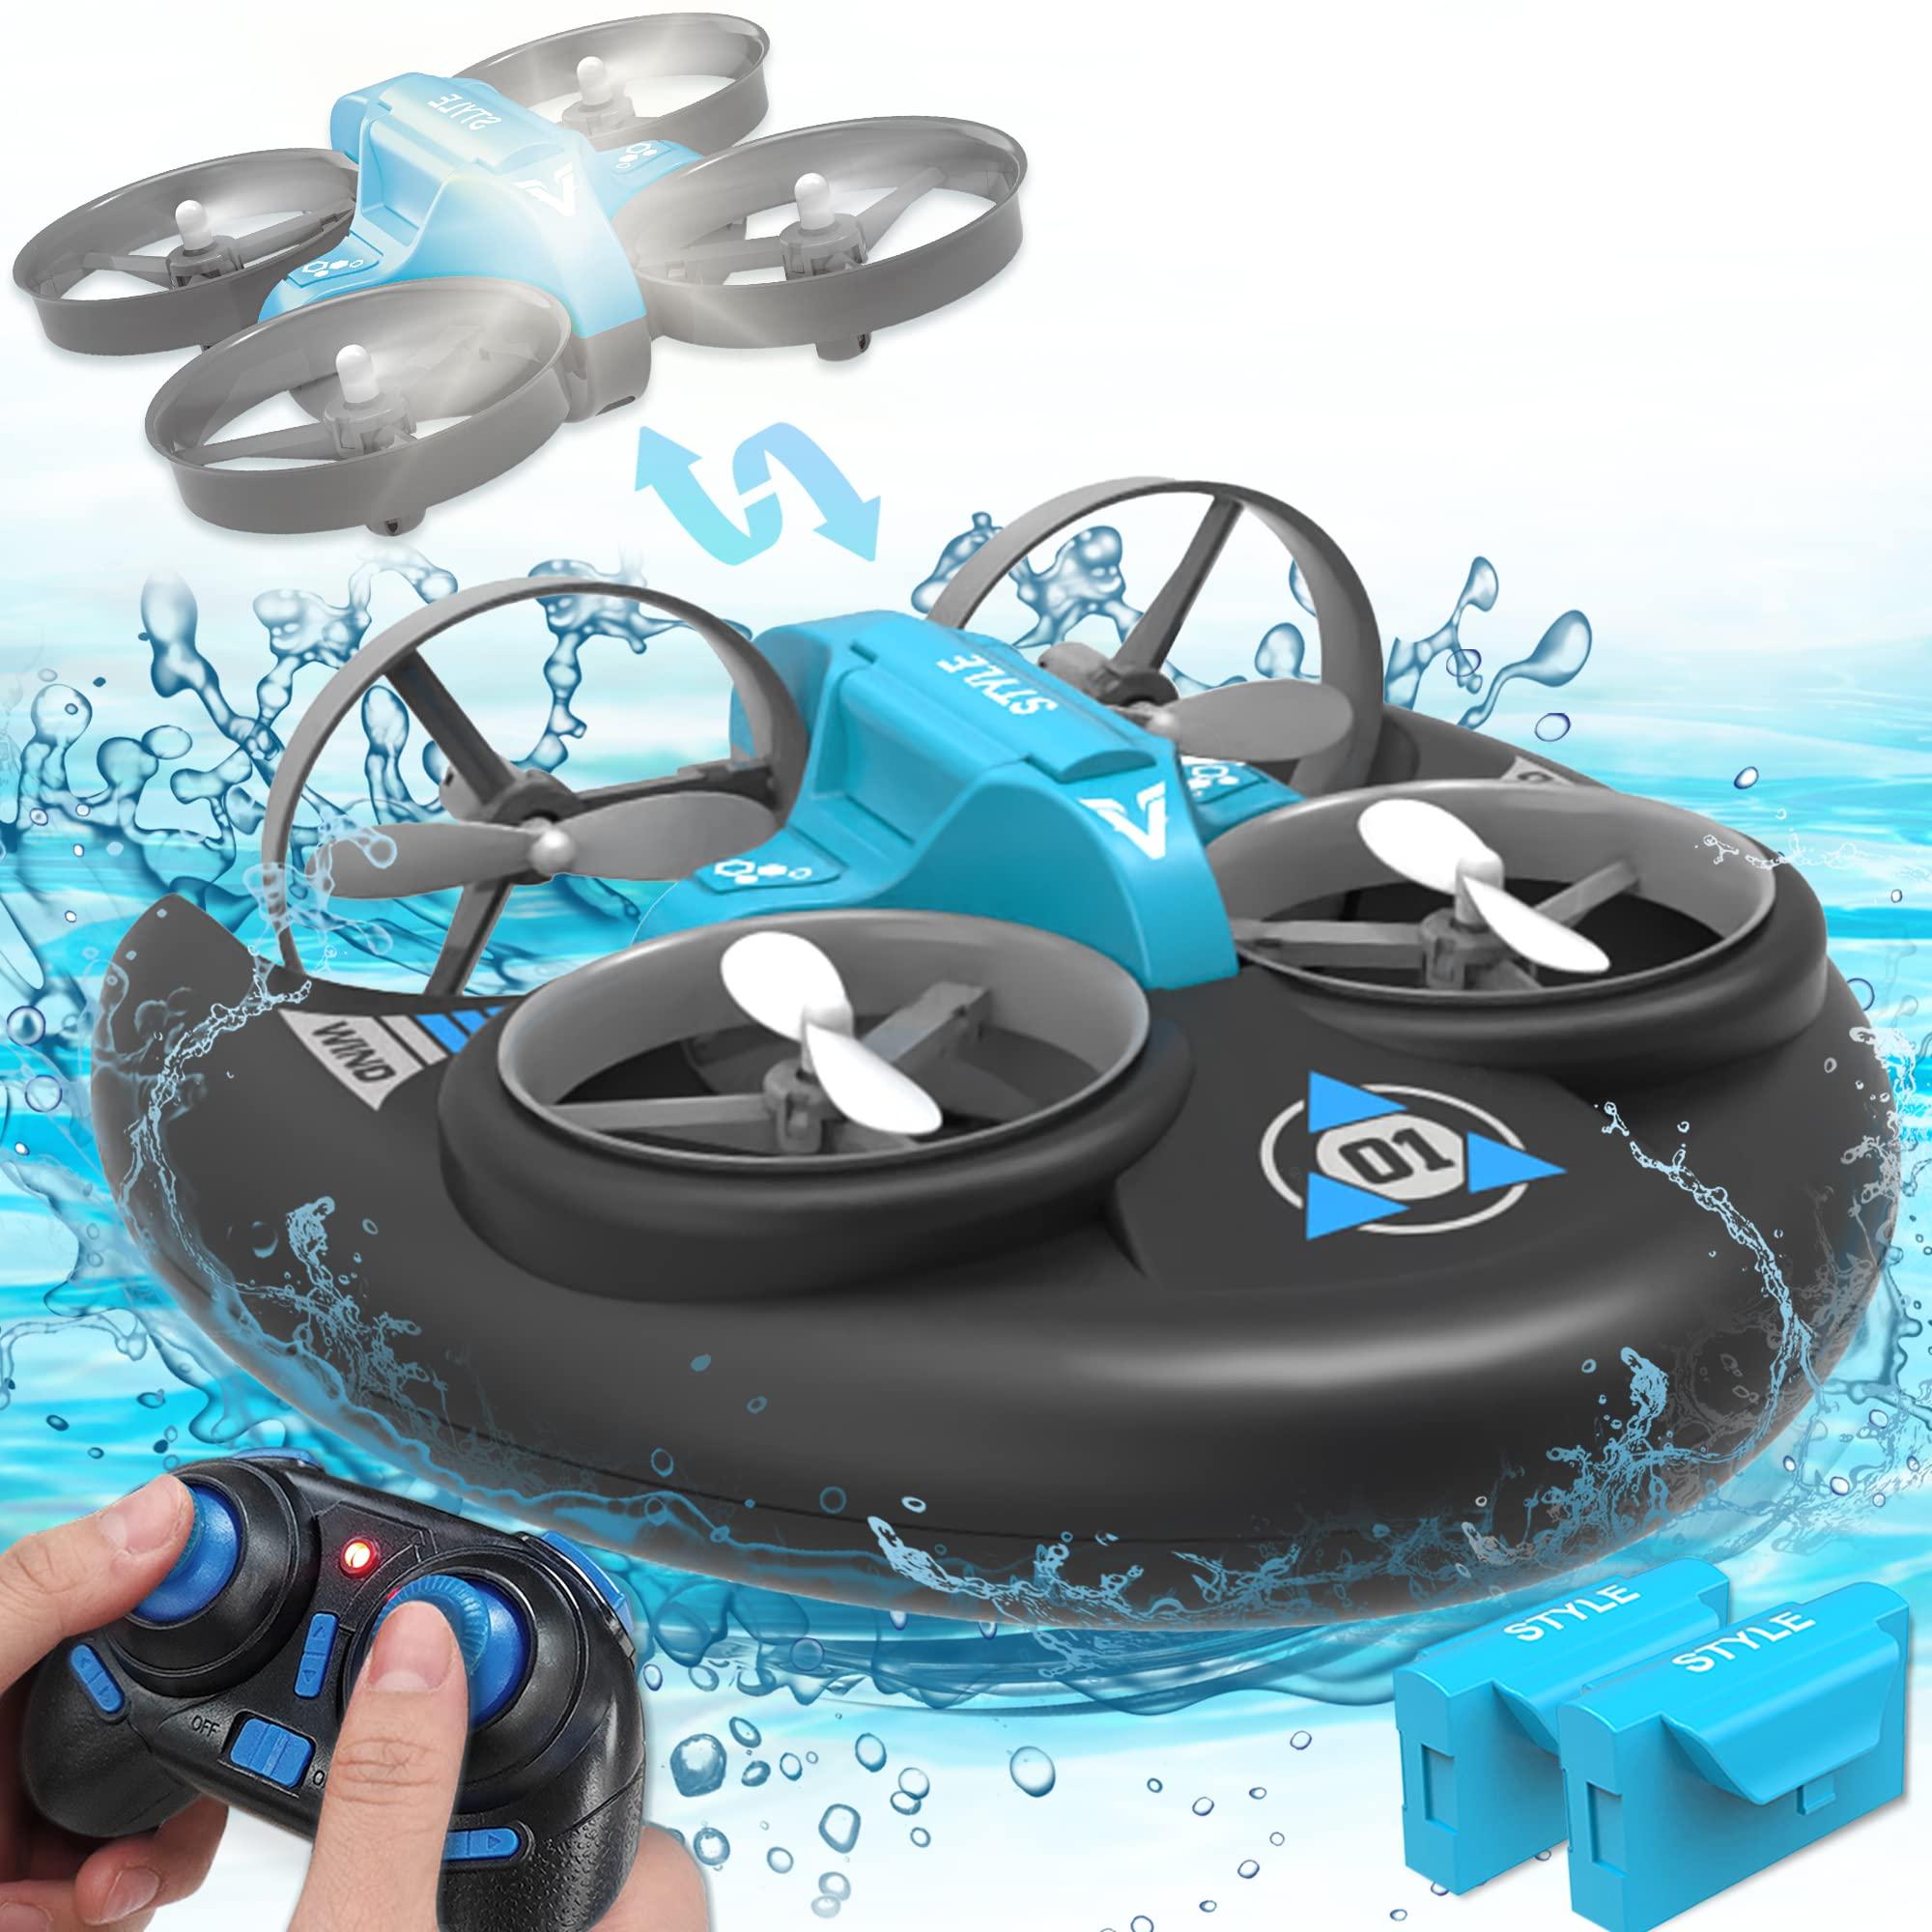 Cool Rc Toys:  Awesome RC Toys for the Adventurous: Drones, Cars, and Boats 